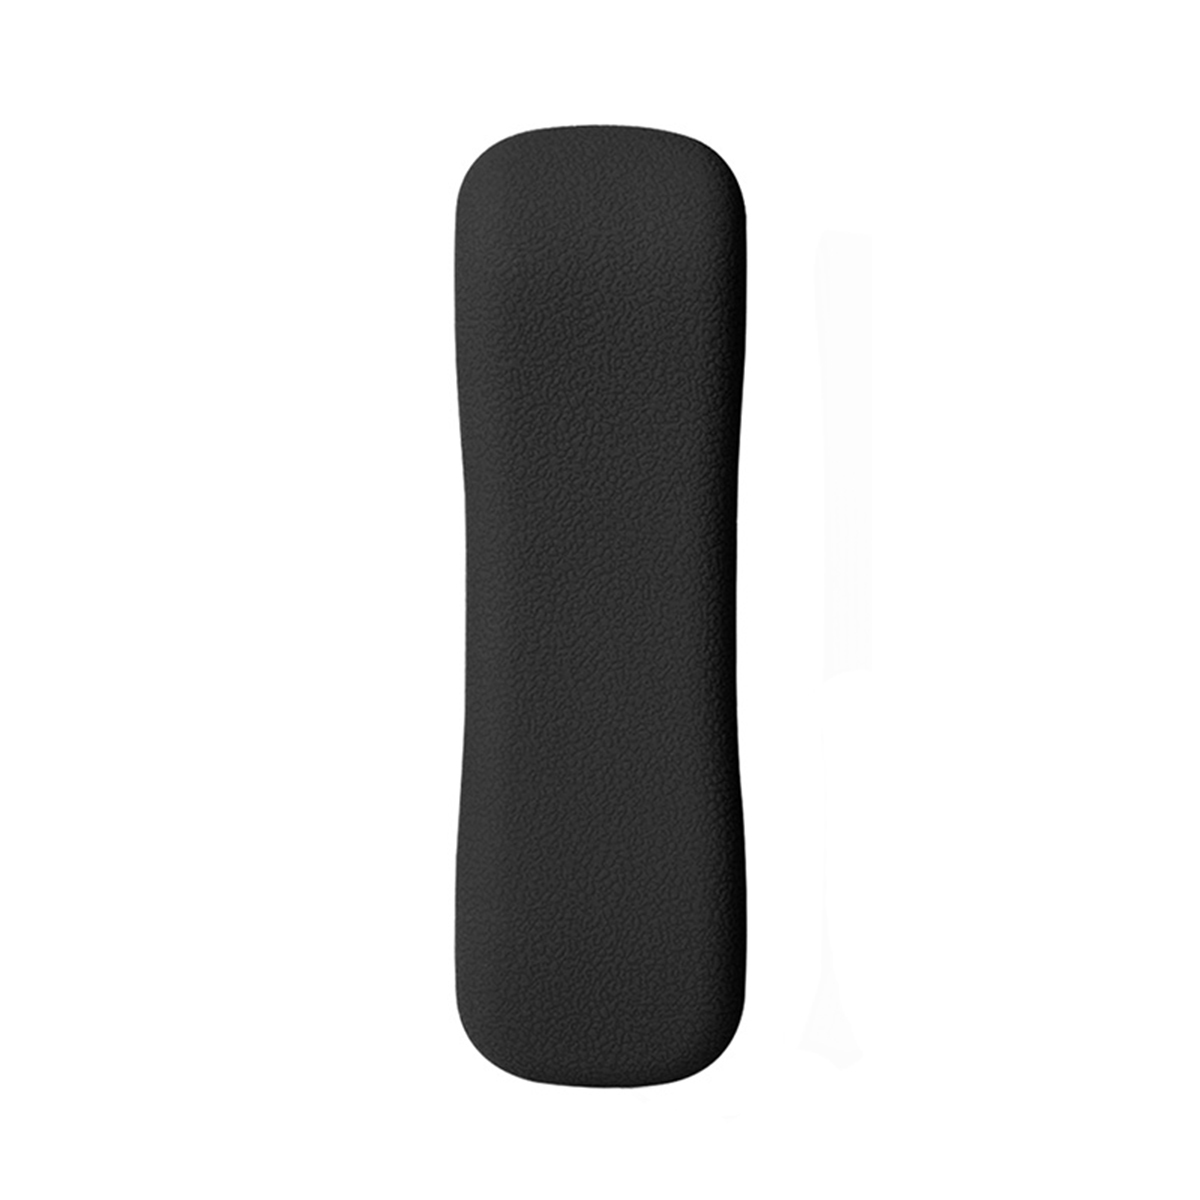 Find Black TV Remote Control Cover Skin For Amazon Alexa Voice Fire TV Remote Newest Second Generation for Sale on Gipsybee.com with cryptocurrencies